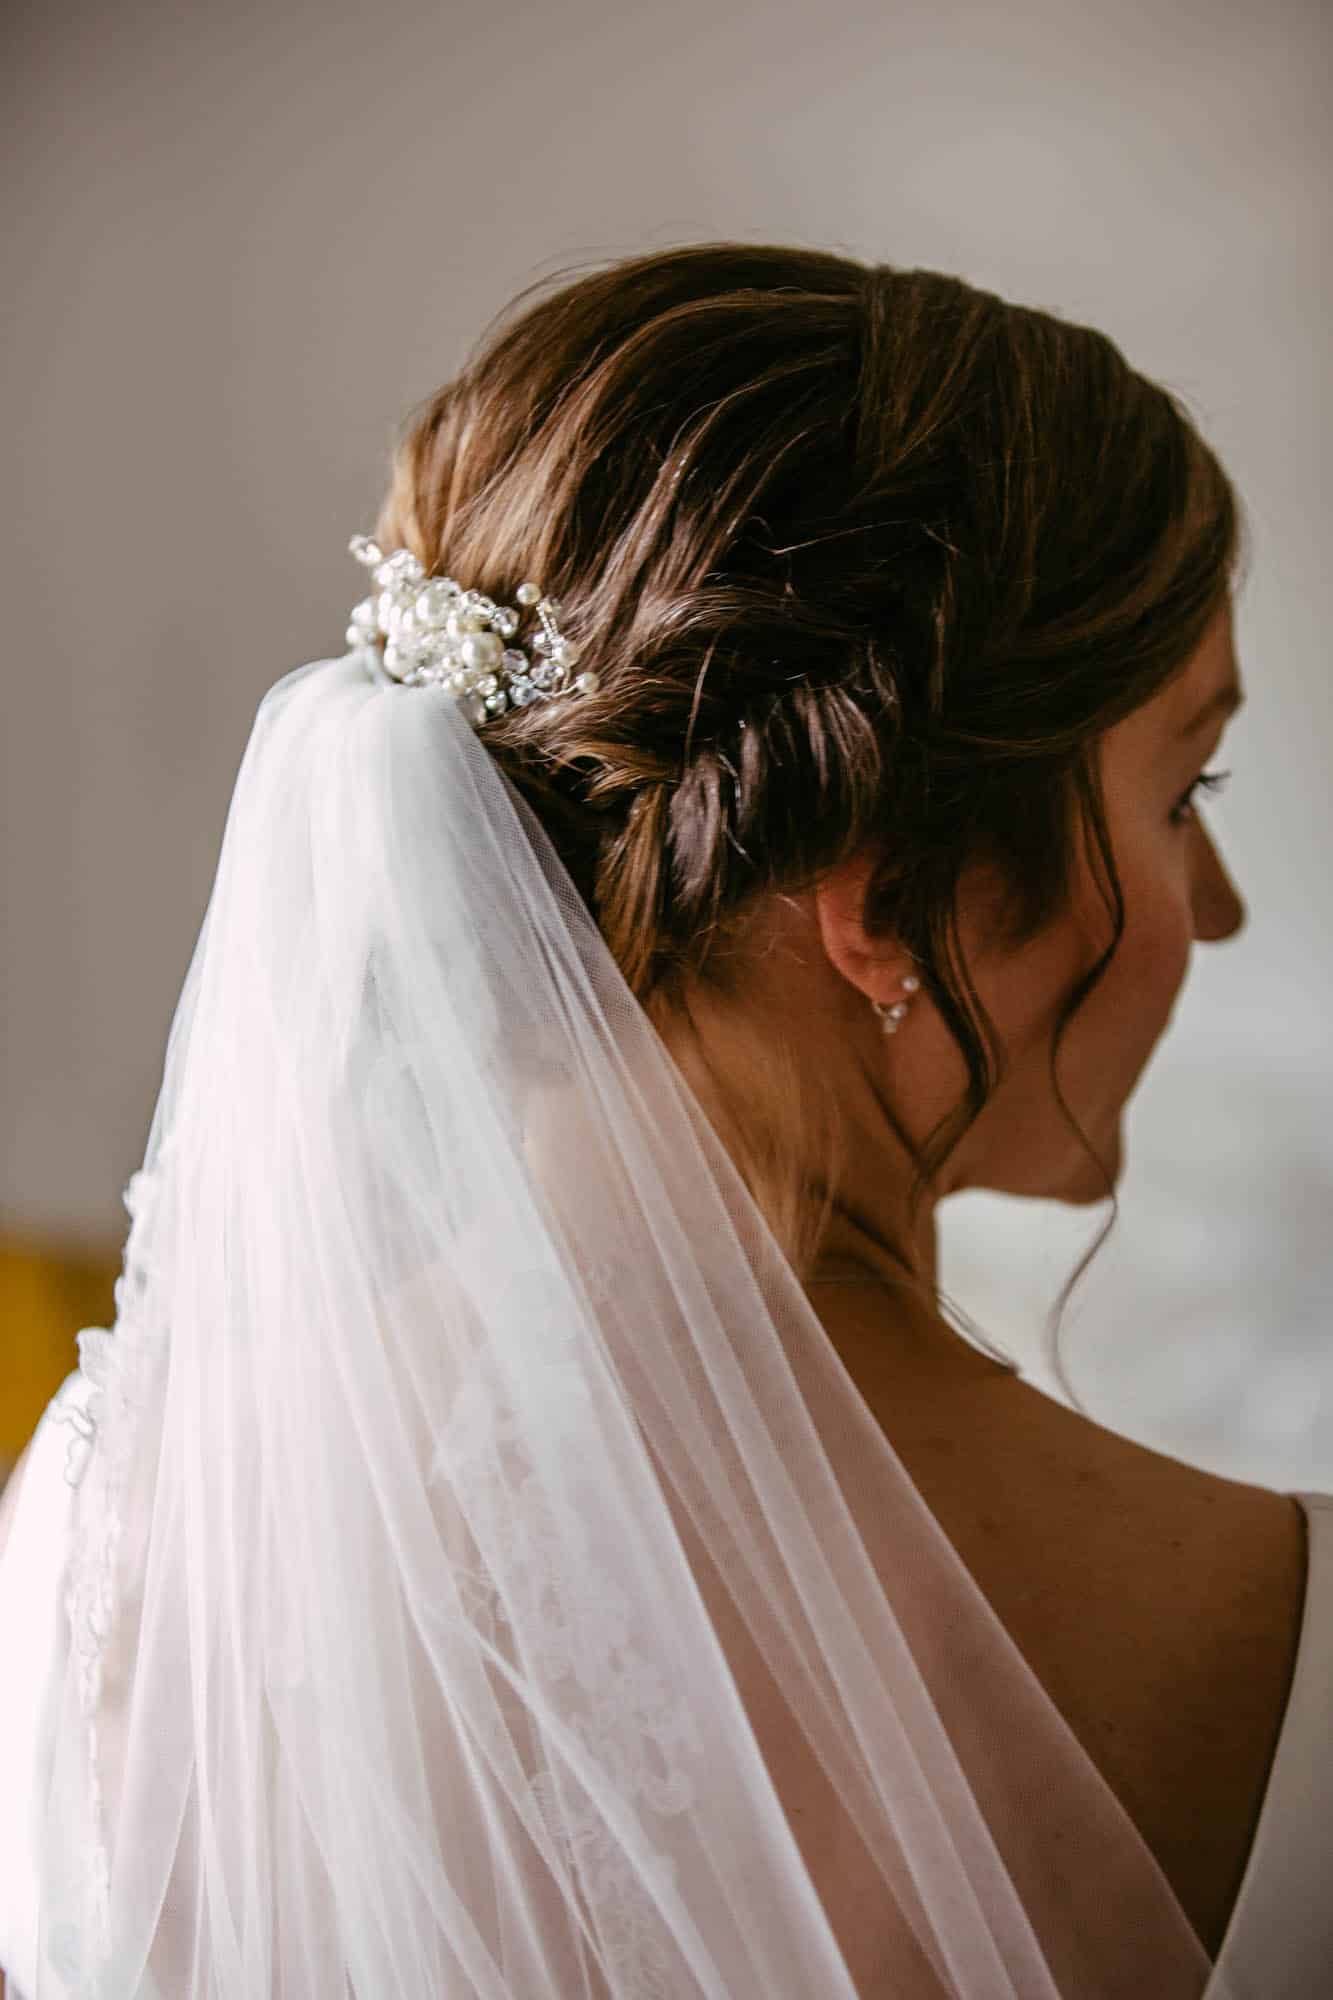 A bride with a veil in her hair, with beautiful bridal hairstyles.